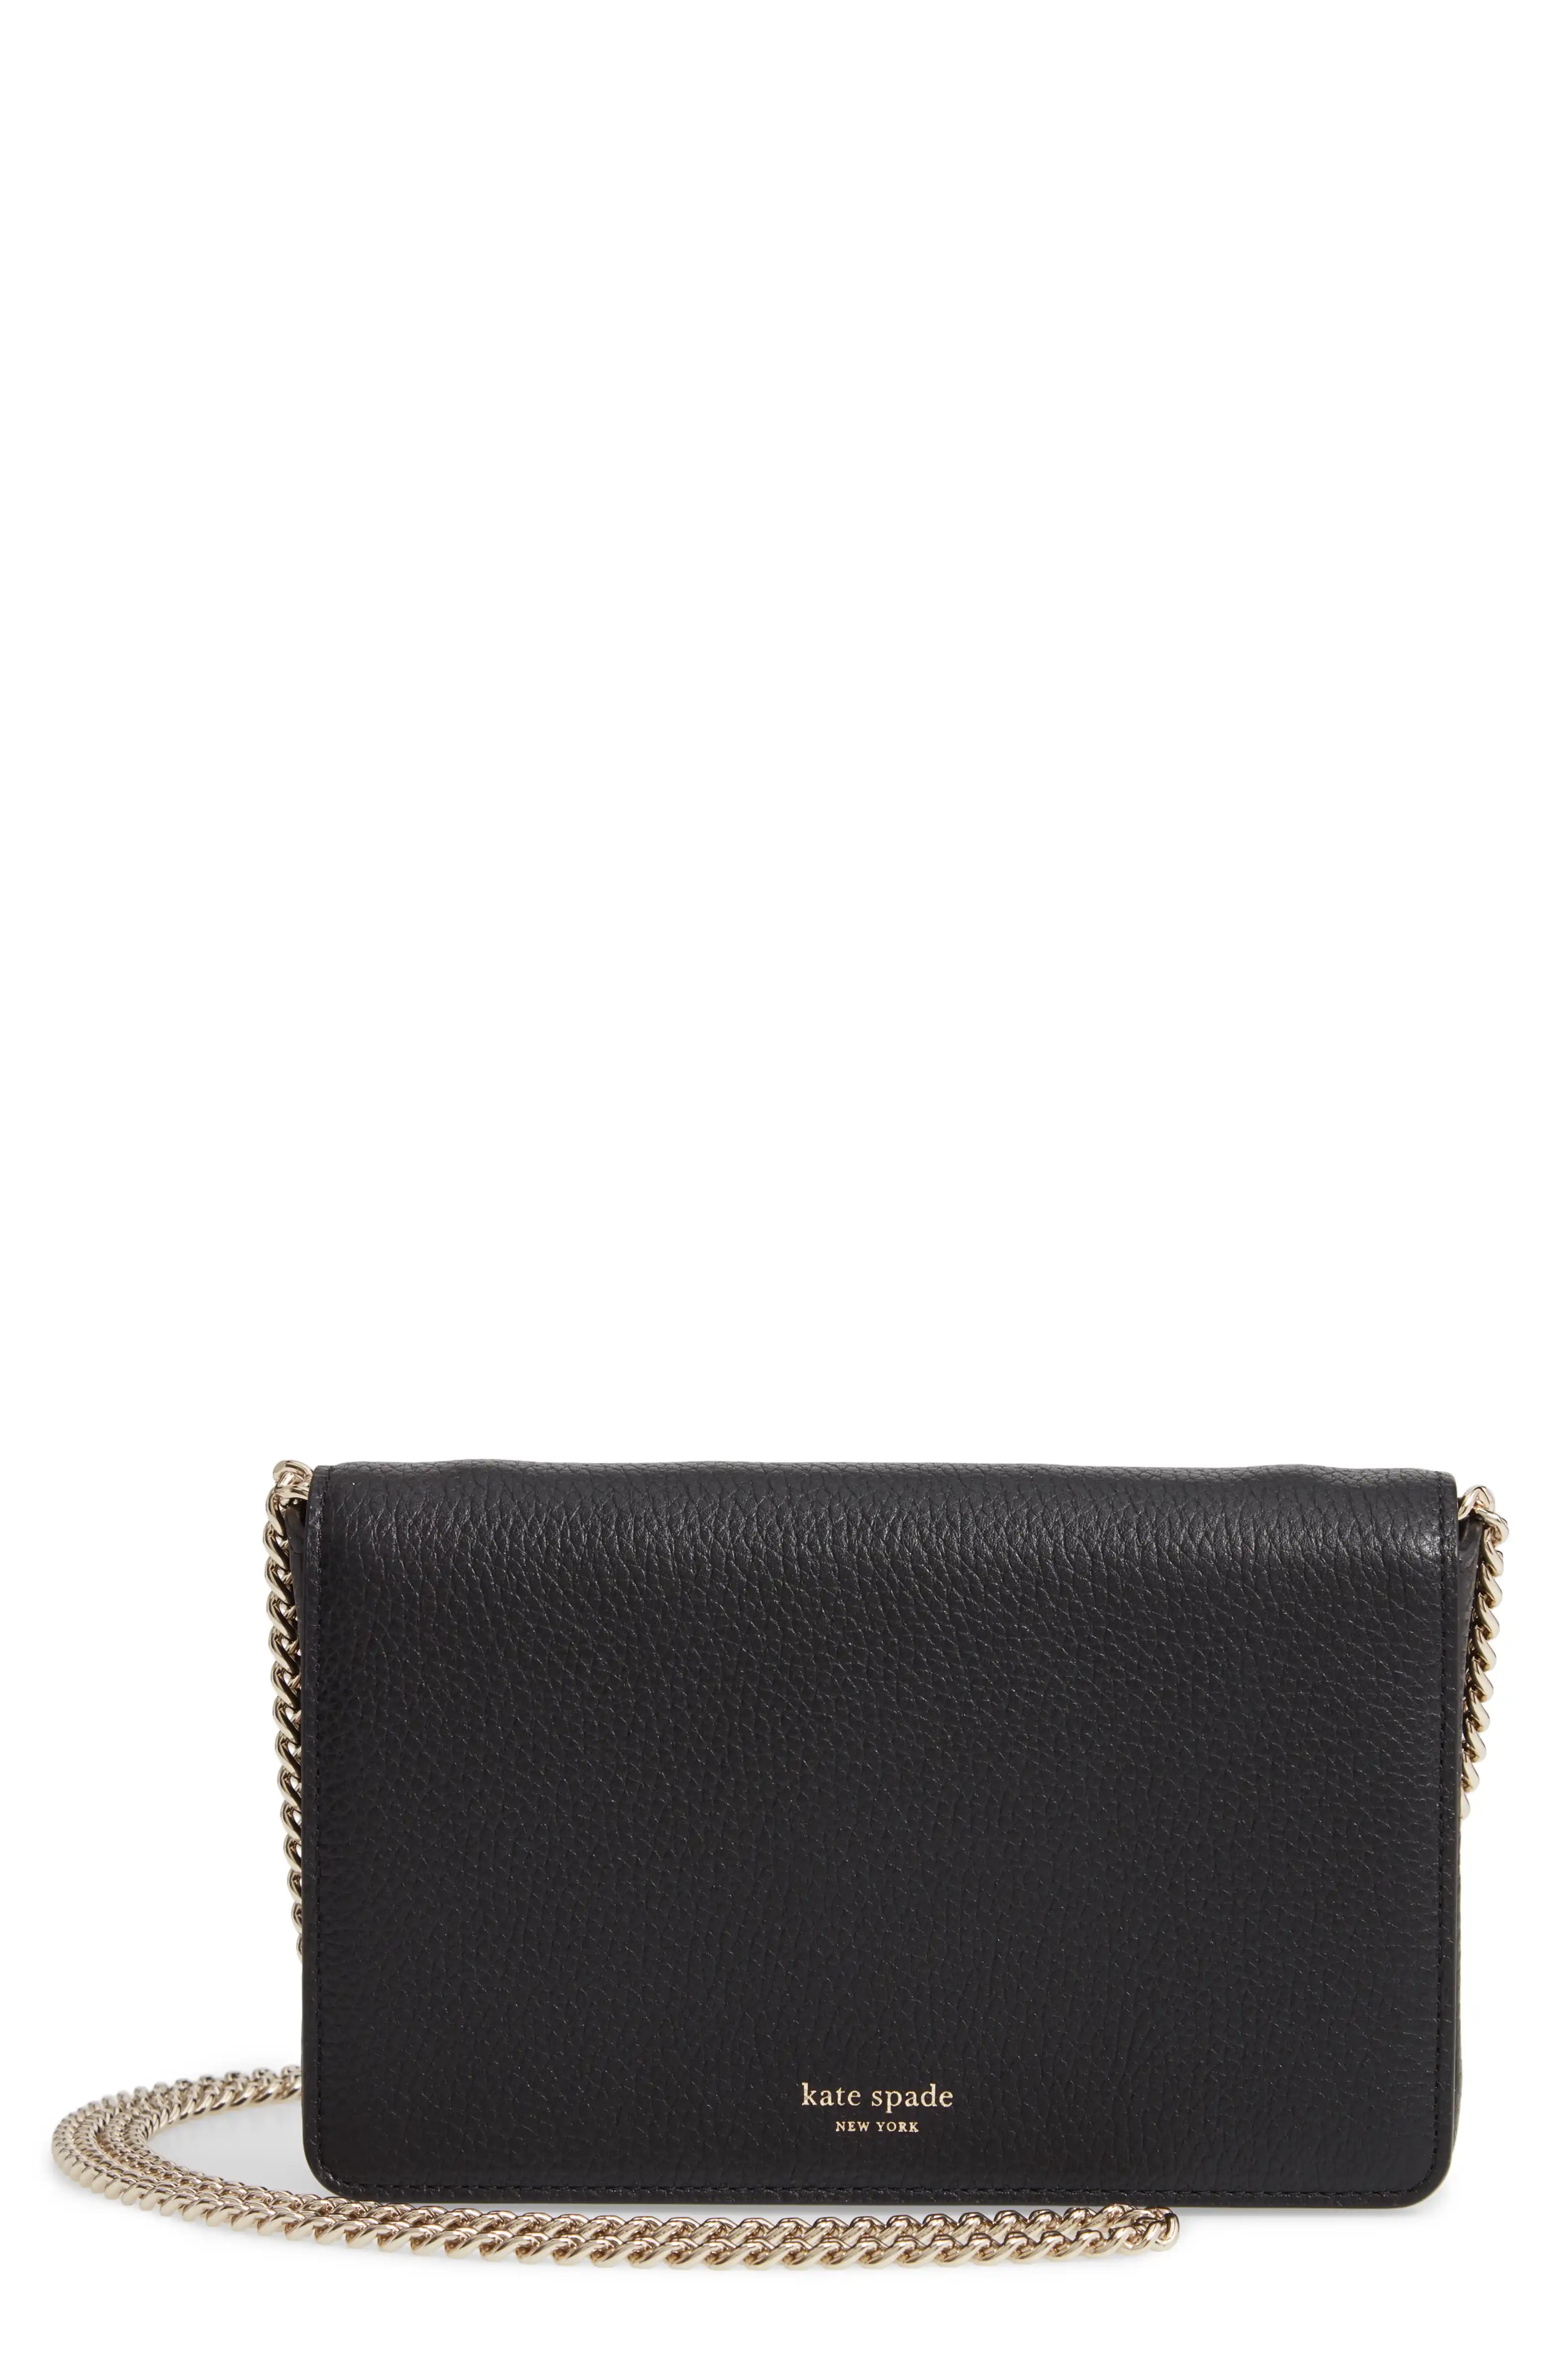 shirley leather chain wallet crossbody bag | Nordstrom